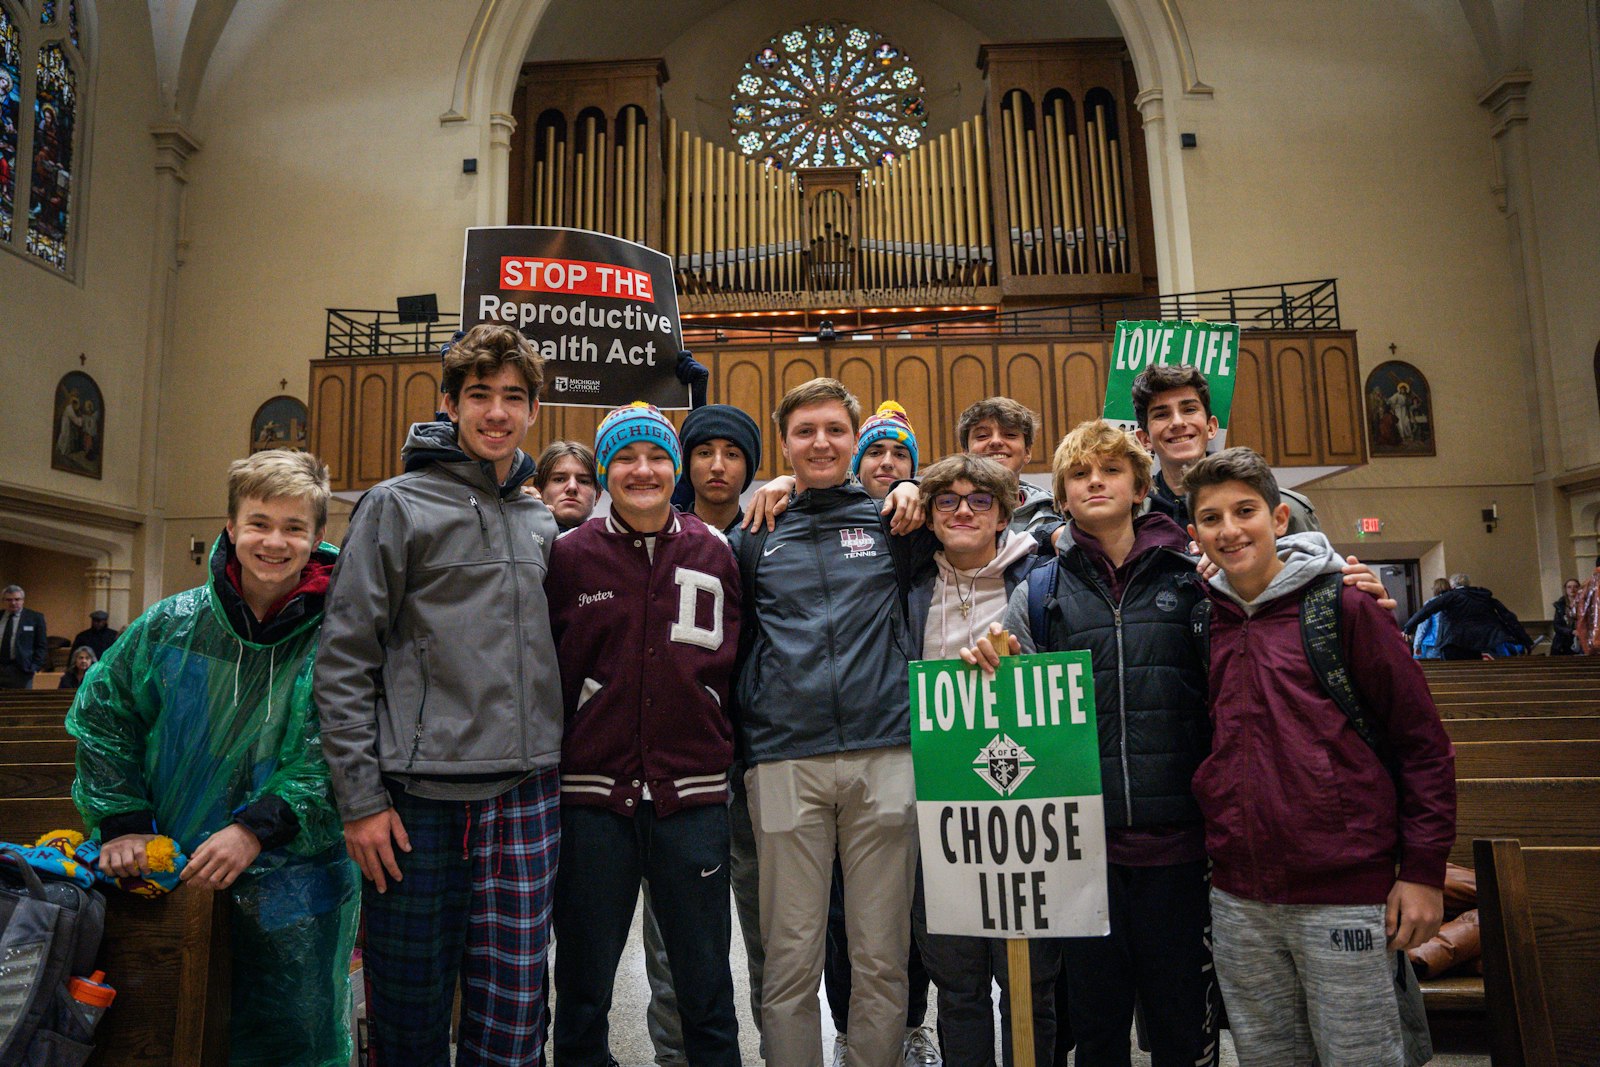 Students from University of Detroit Jesuit High School pose for a photo after the Mass for Life in St. Mary's Cathedral in Lansing.